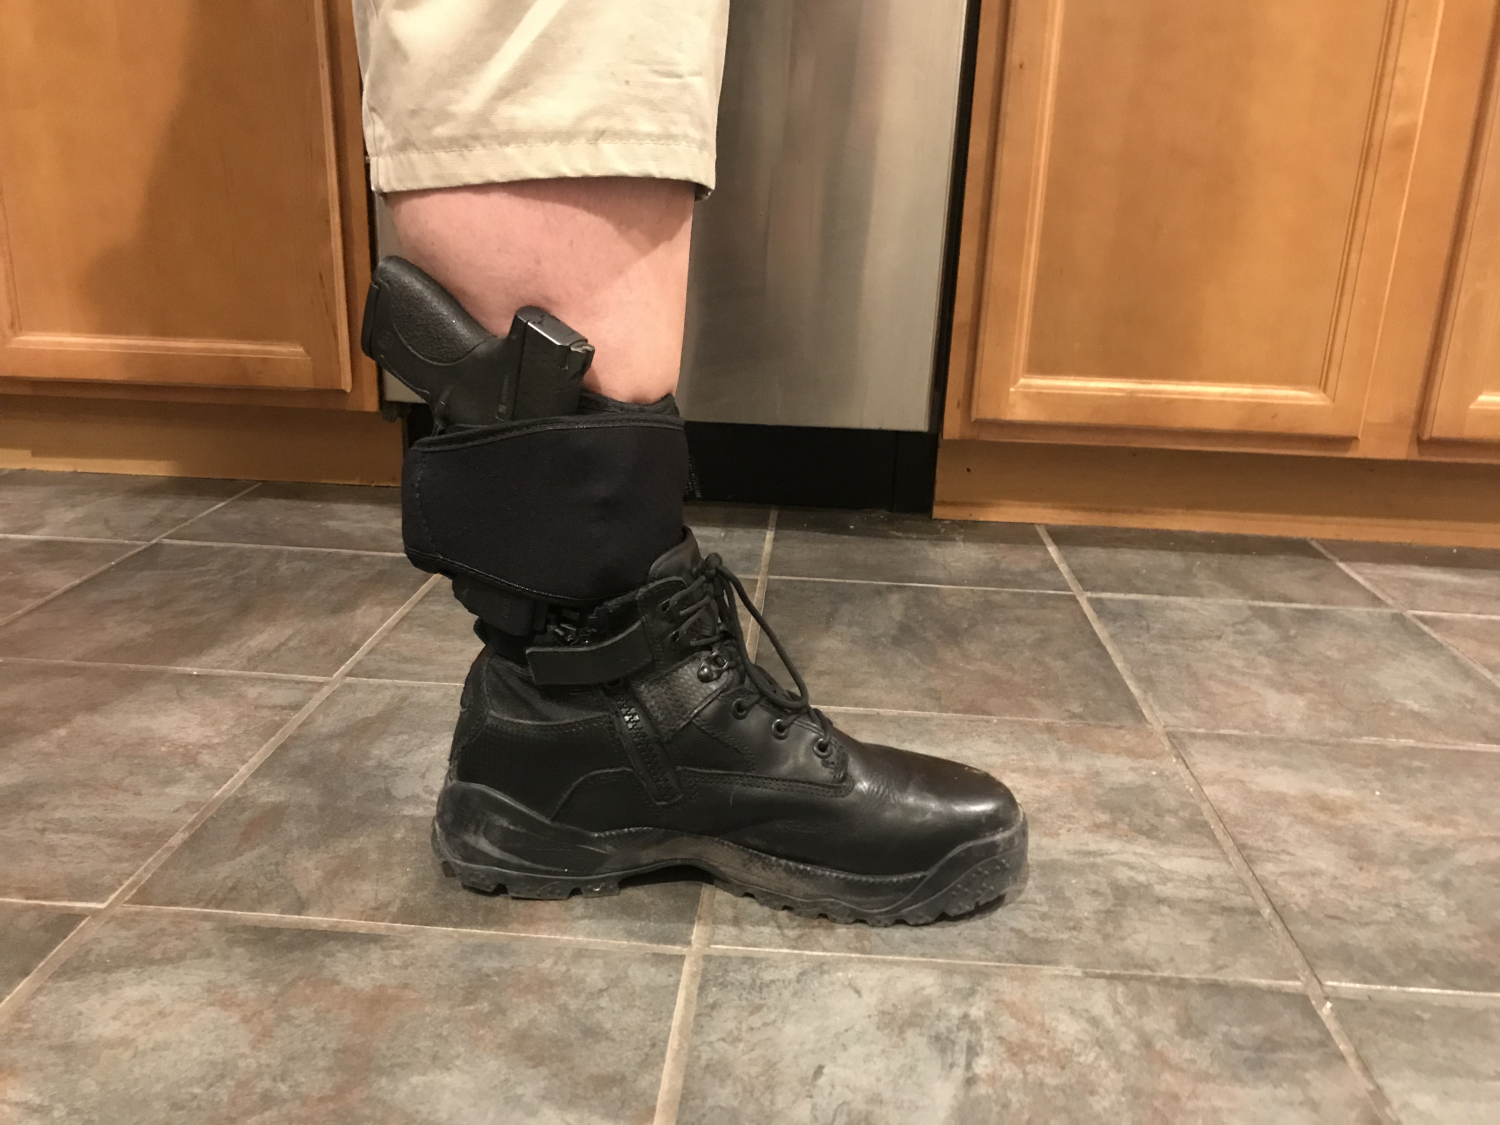 Holster exposed. It is at the highest setting and rests on the top of the boot. You might be able to run it with a higher boot, but you would certainly NOT be able to use the lower wrap.